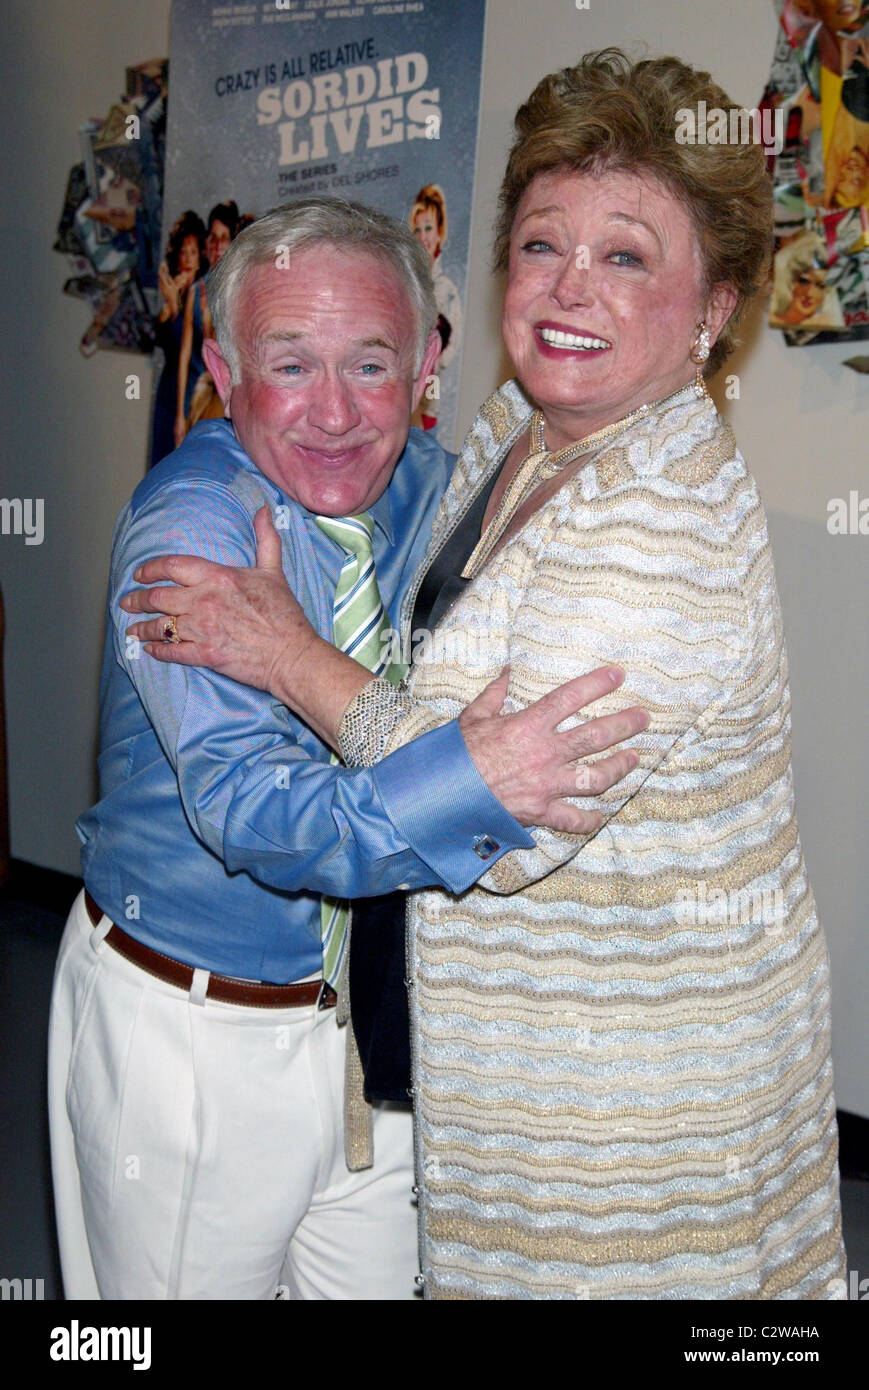 Leslie Jordan and Rue McClanahan World Premiere of 'Sordid Lives: The Series' at the New World Stages New York City, USA - Stock Photo